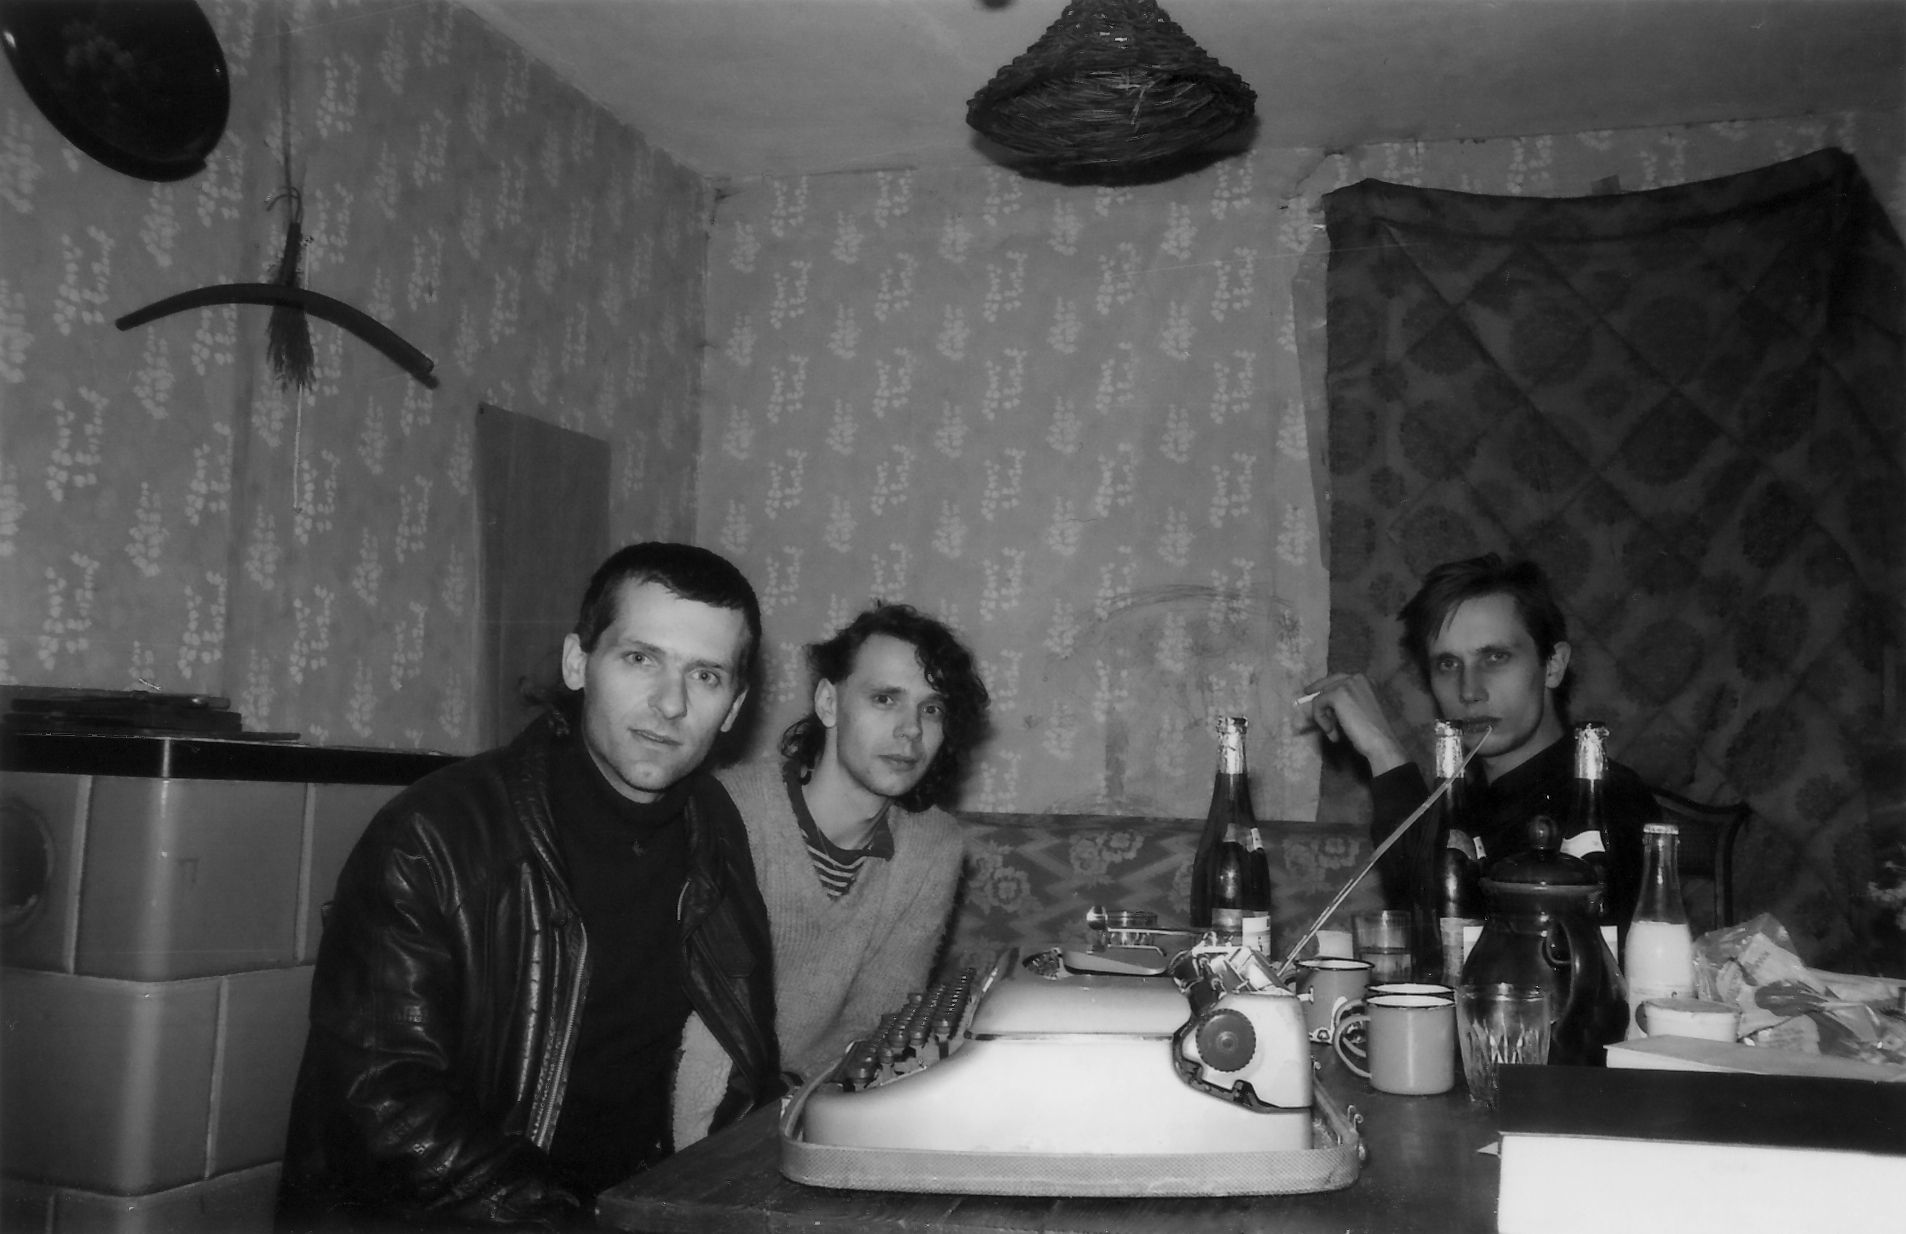 Jan Faktor, Bert Papenfuß and Stefan Döhring (from left to right) working together, 1984.